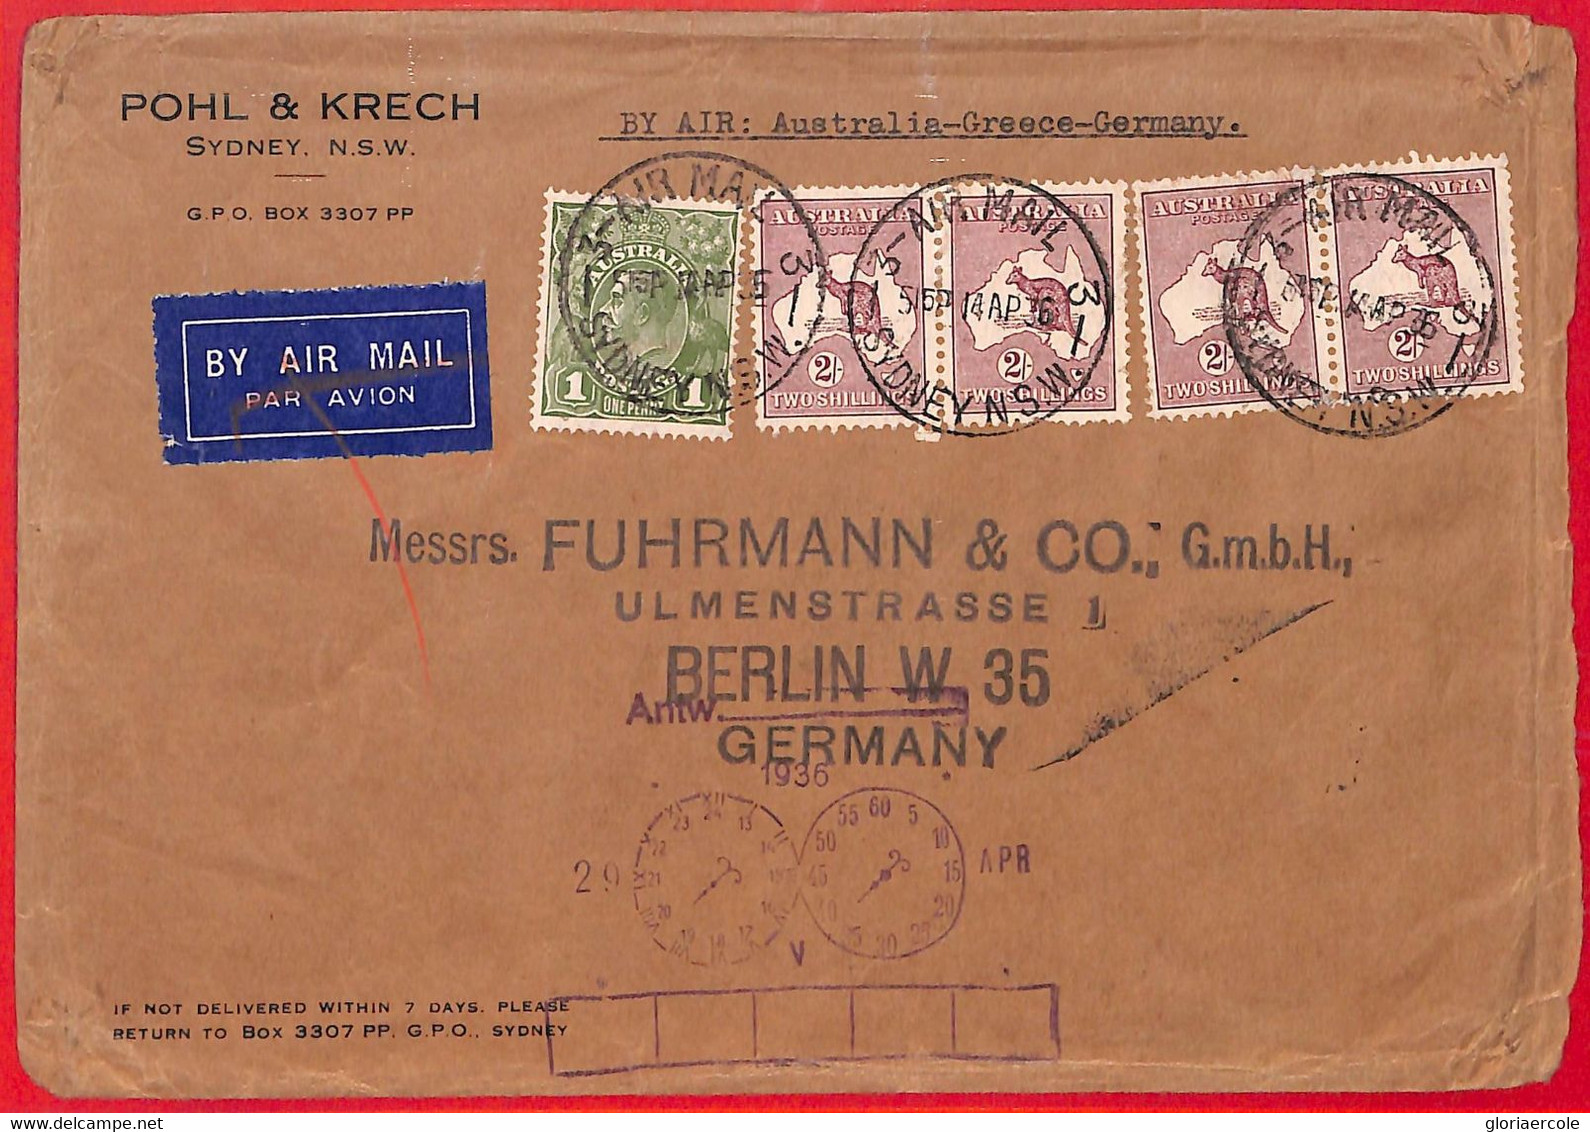 Aa3739 - AUSTRALIA - POSTAL HISTORY -  AIRMAIL COVER To GERMANY  1936 - Covers & Documents